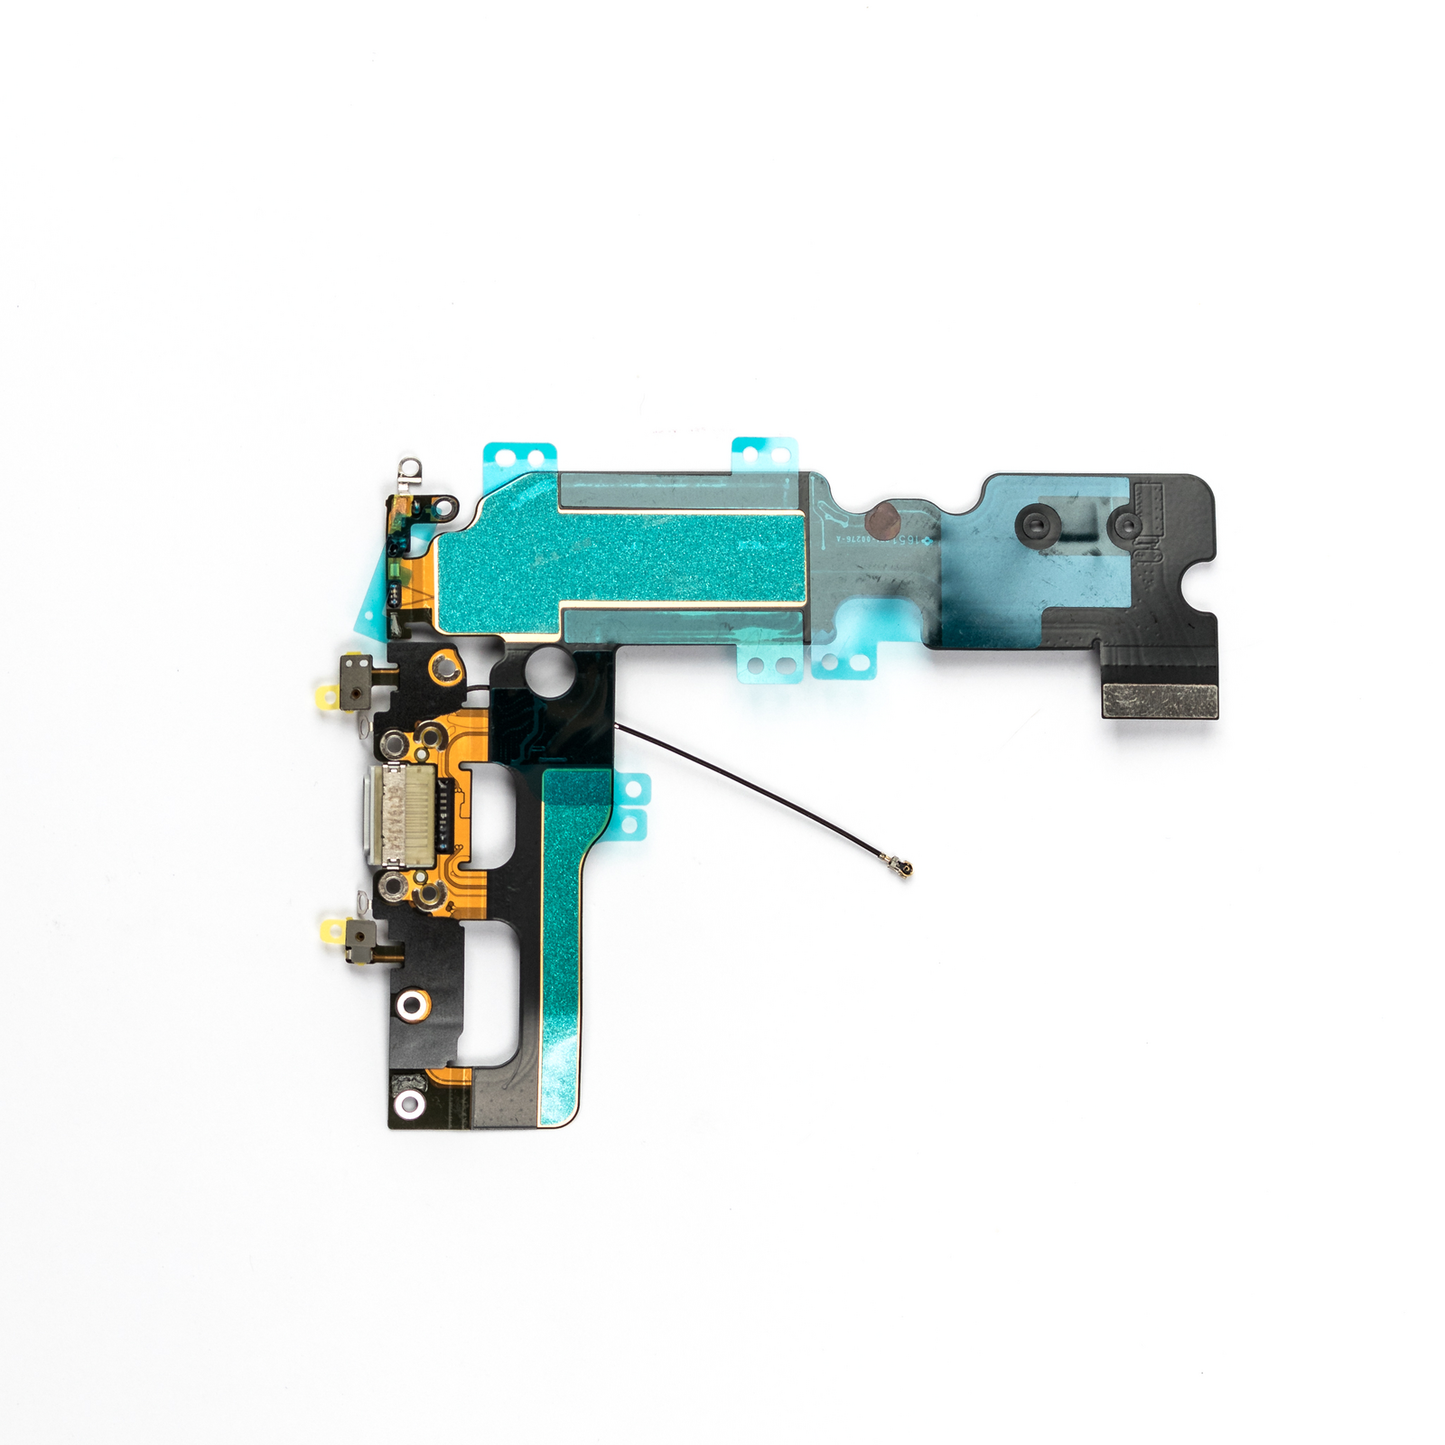 iPhone 7 Plus Charging Lightning Connector Dock Flex Cable